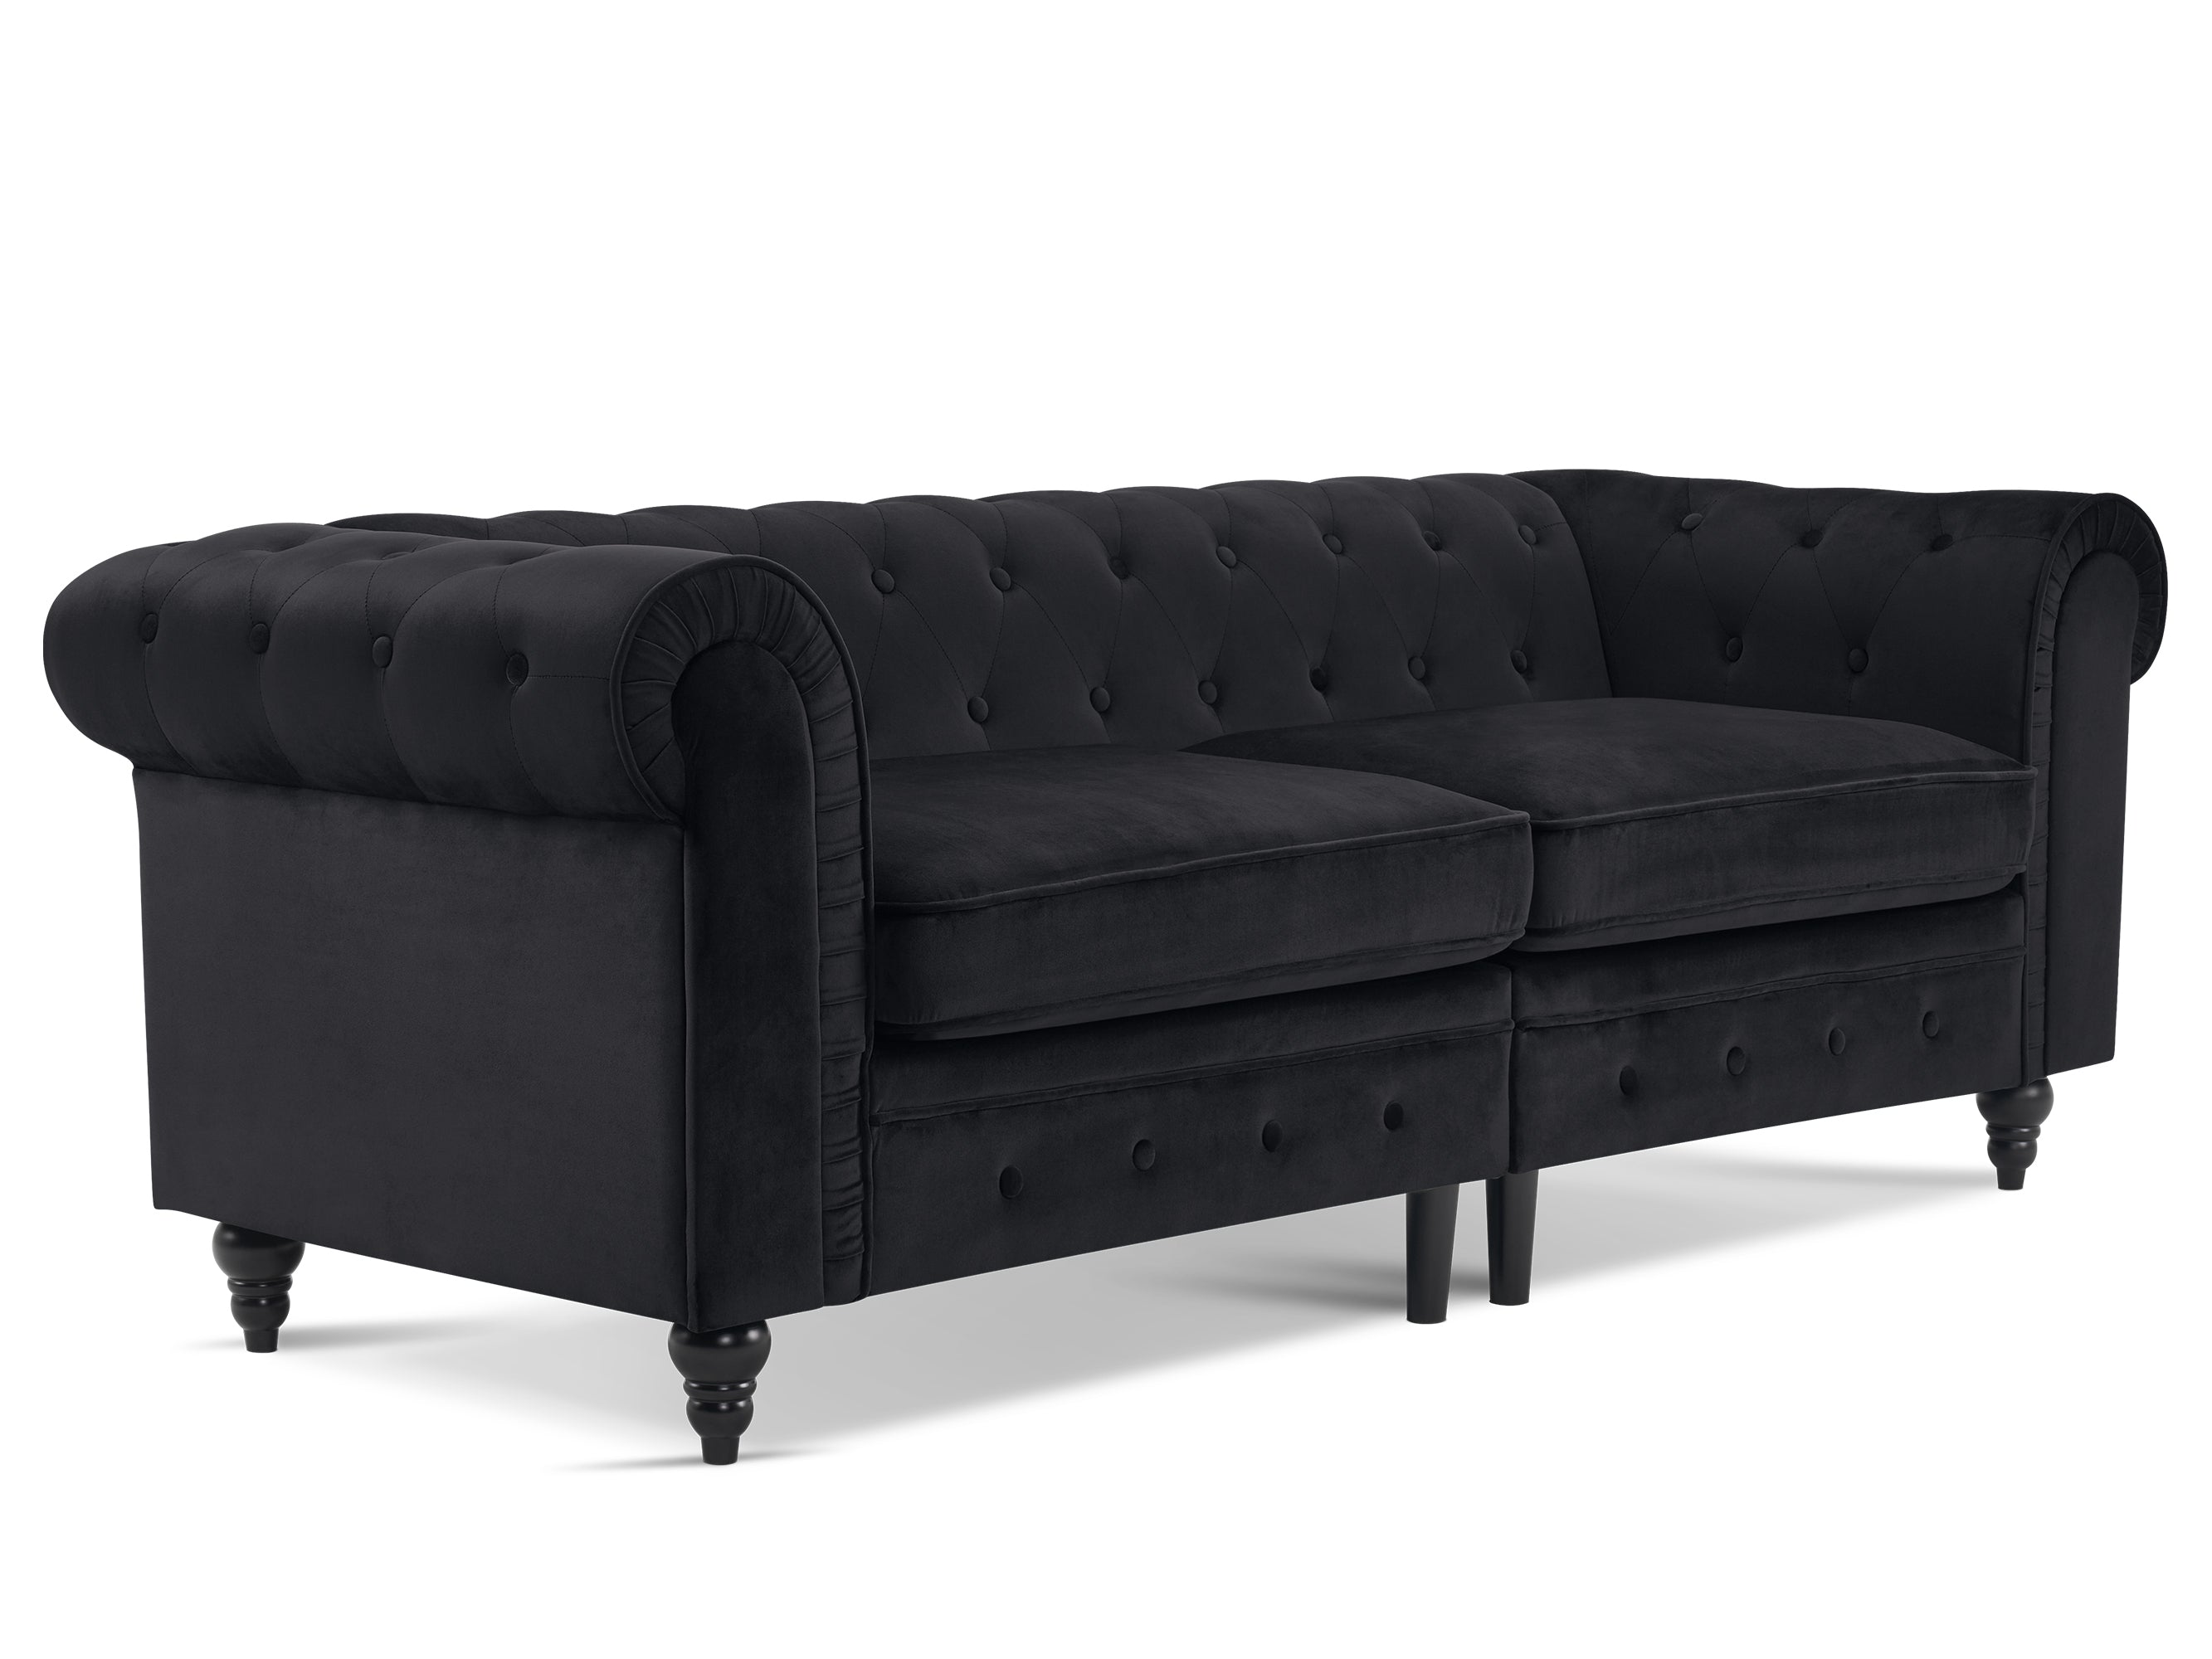 ivinta Small Office Sofa, Black Velvet Tufting Chesterfield Sofa, Mid Century Vintage Couch for Small Spaces Living Room Bedroom